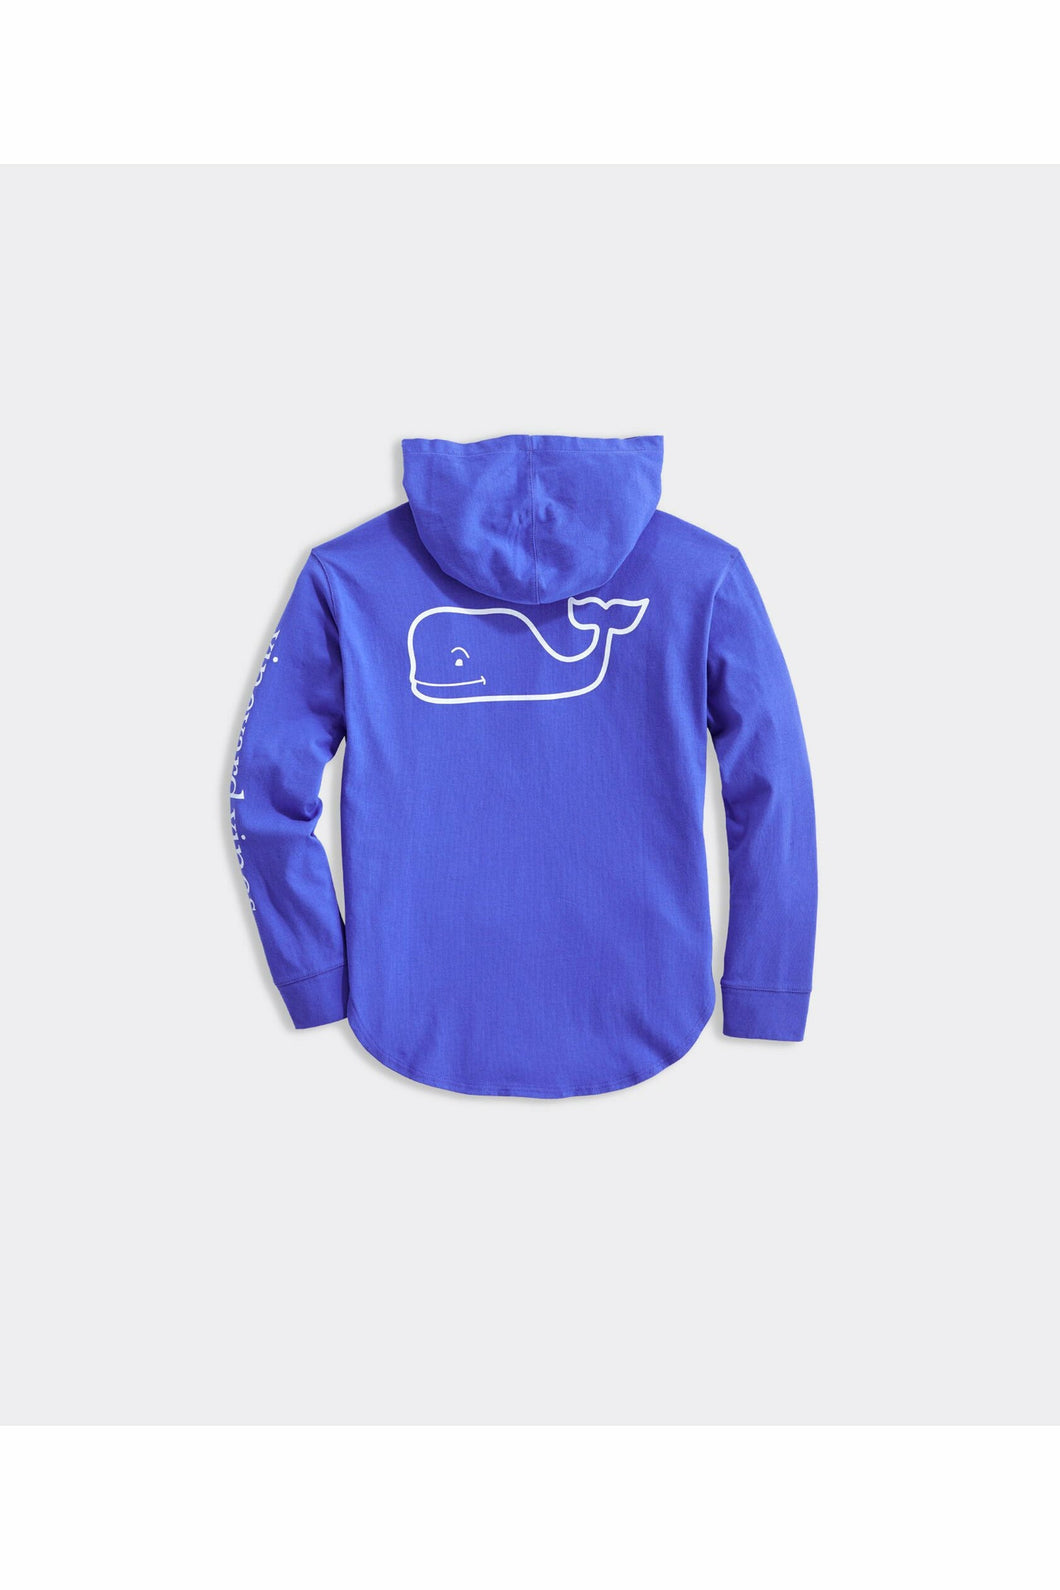 LS VNTG WHALE HDY TEE